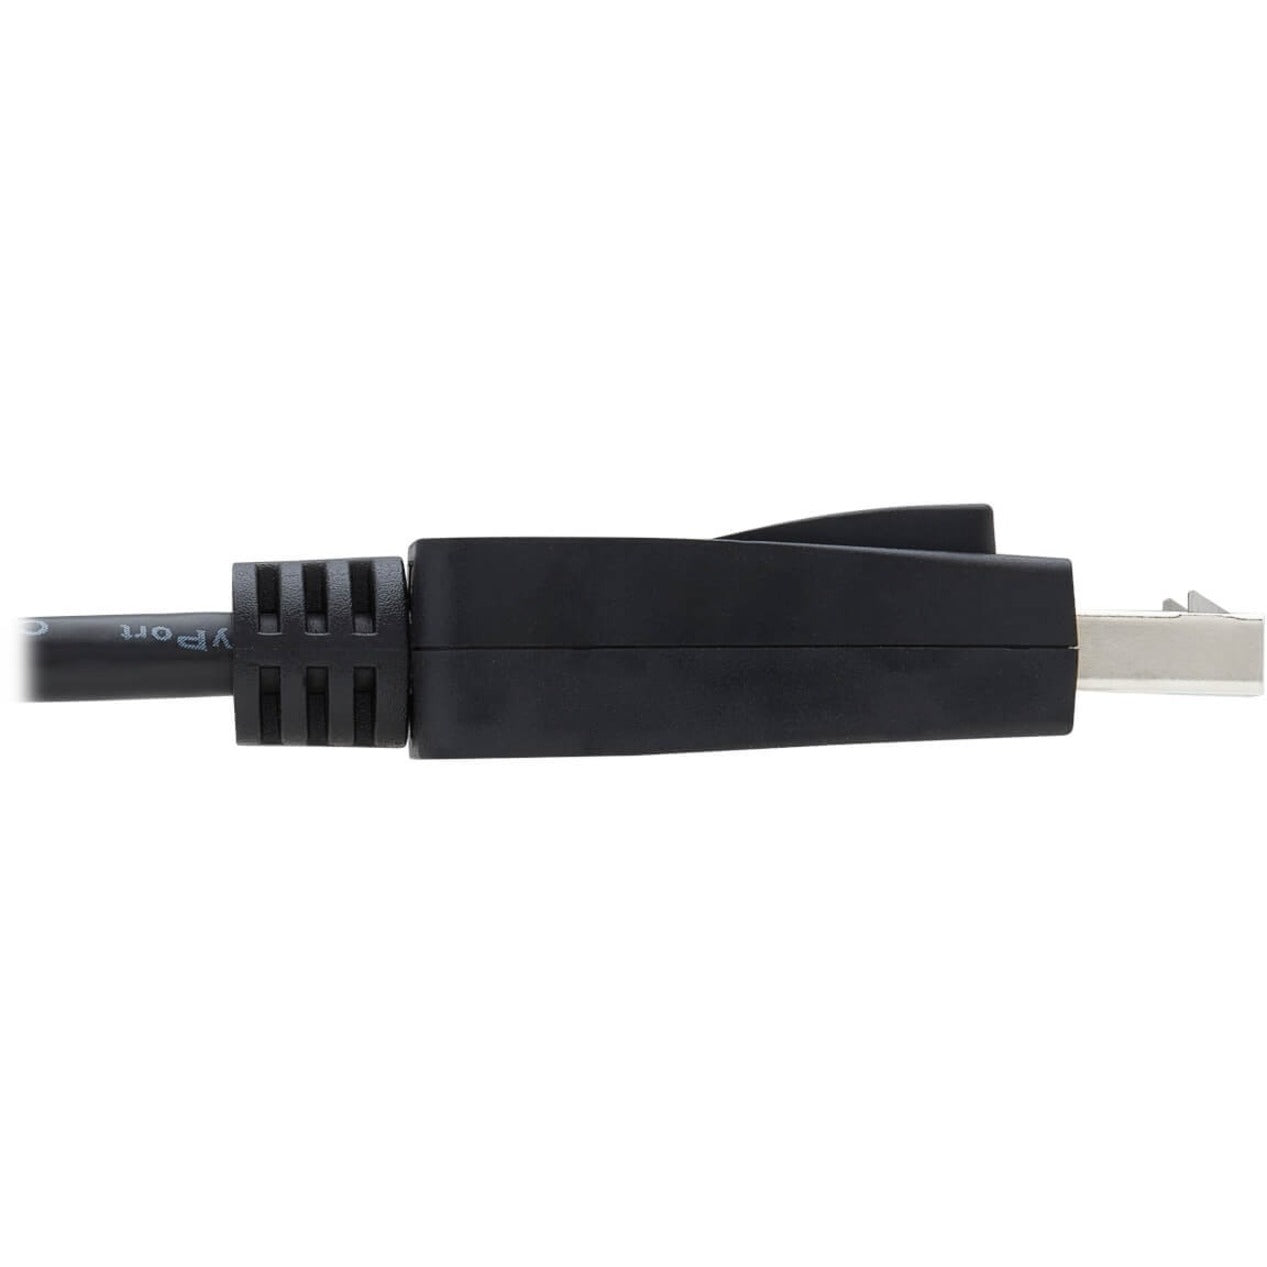 Tripp Lite P580-015-V4 DisplayPort 1.4 Cable, 8K, 15 ft., Plug & Play, Gold-Plated Connectors